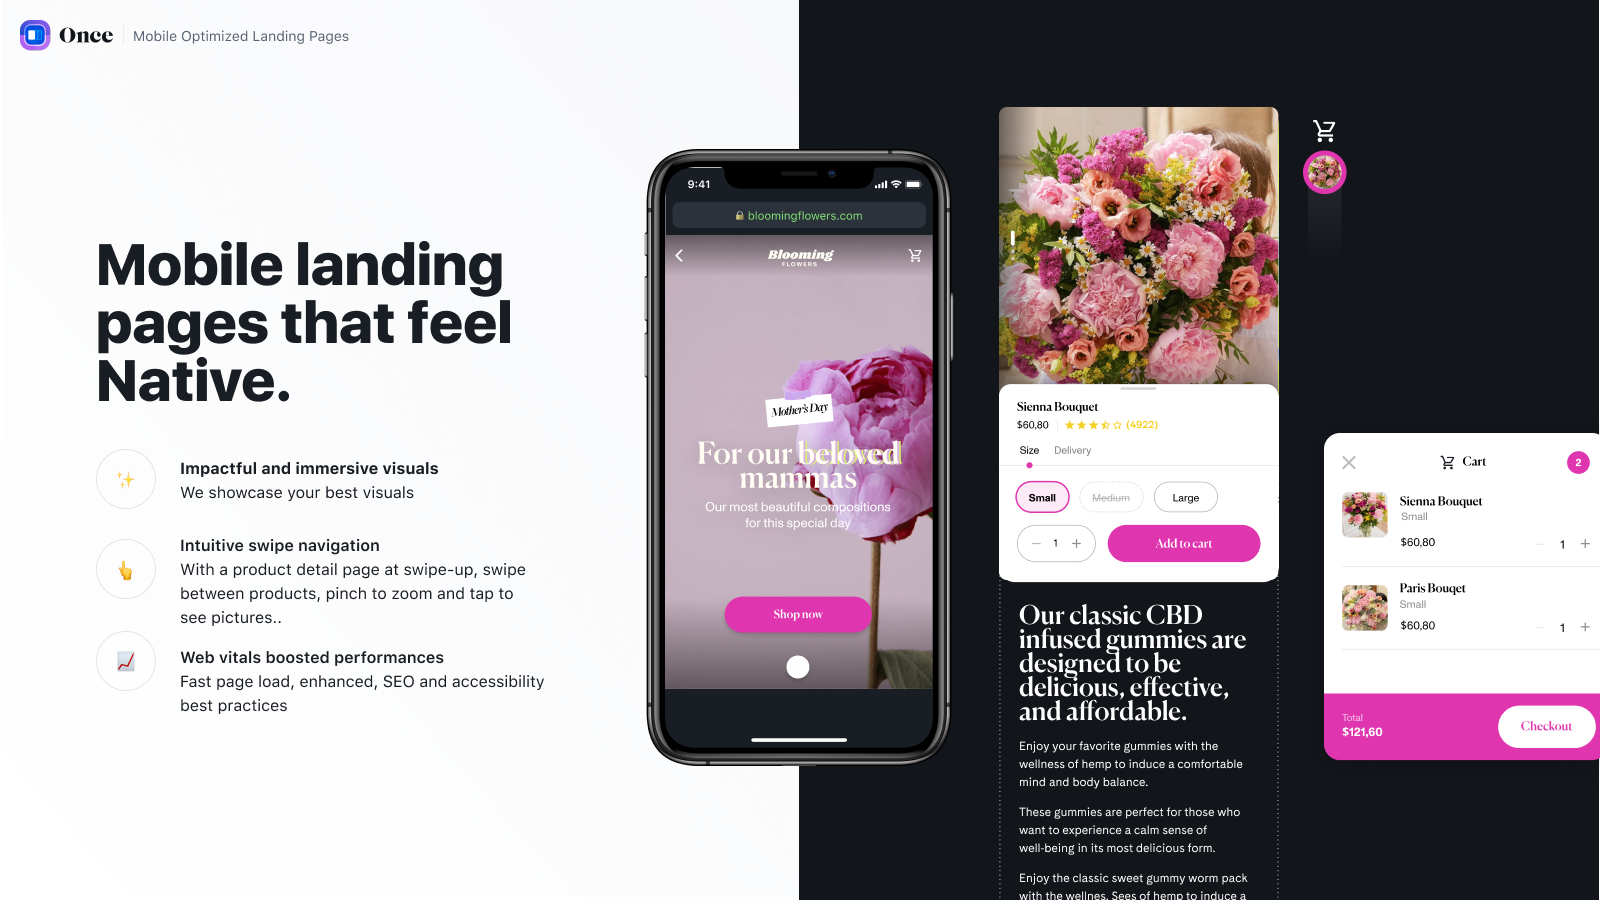 Mobile landing pages that feel native